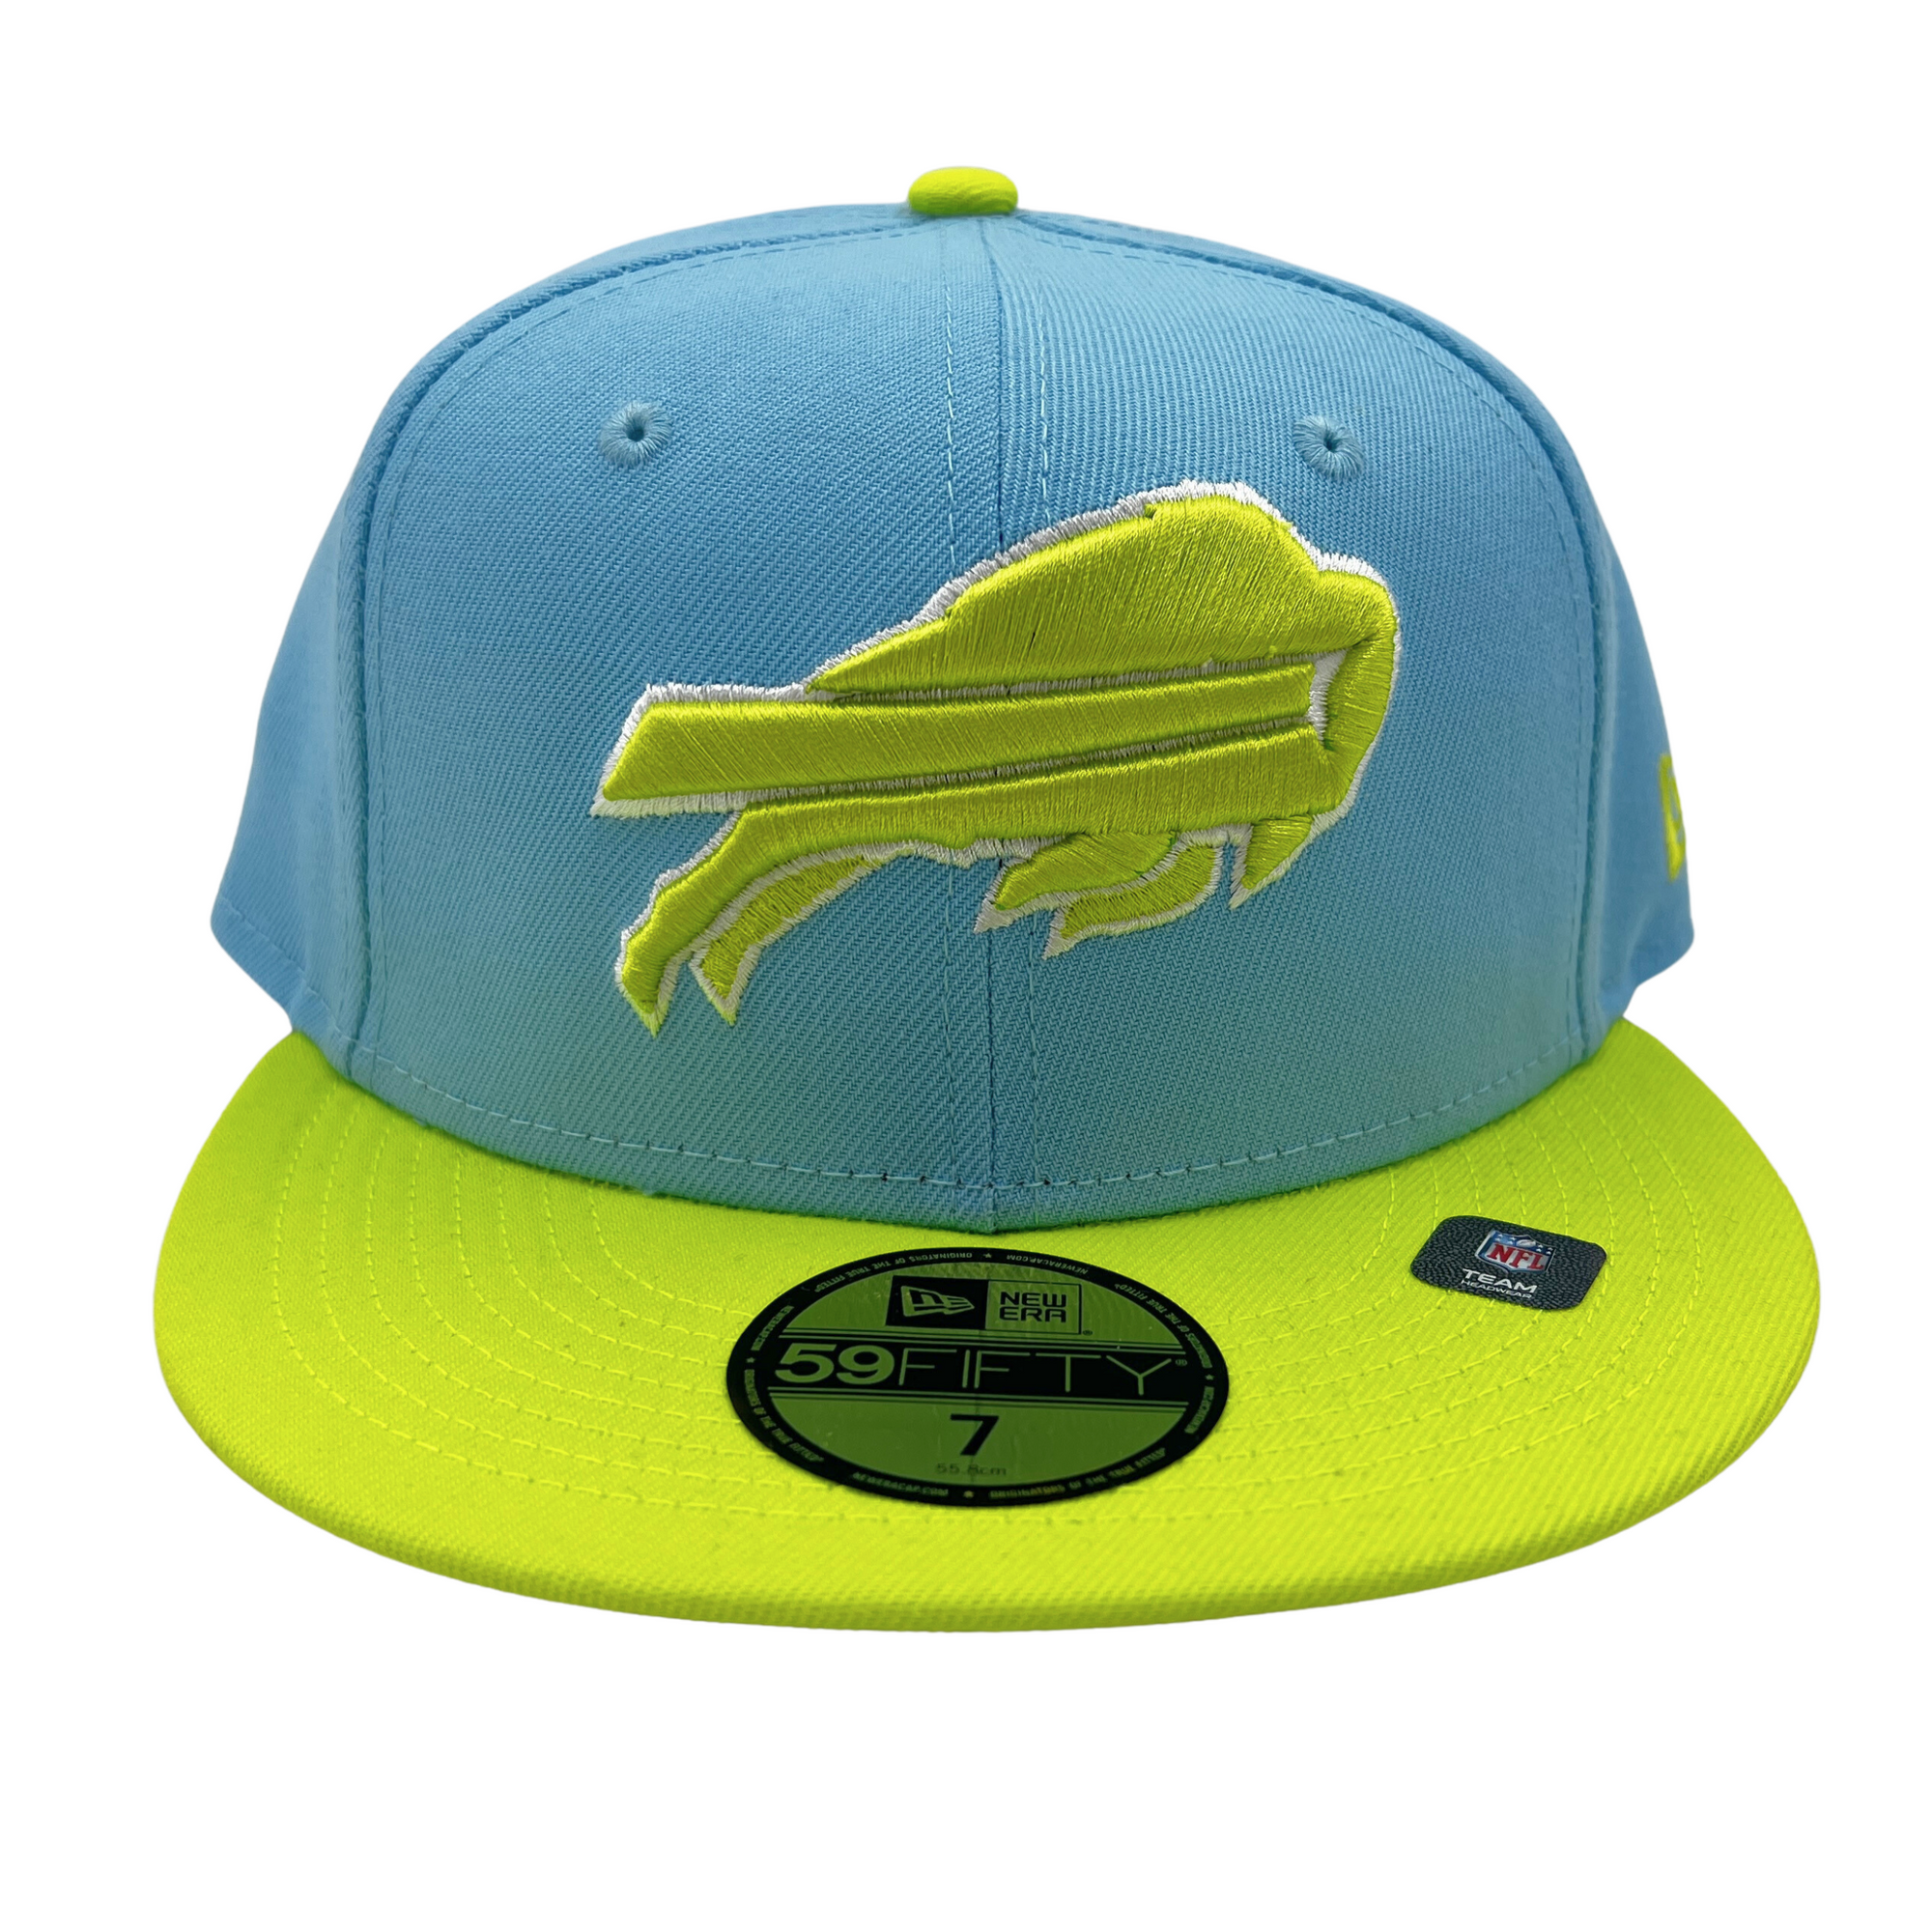 New Era Bills Light Blue & Lime Colorpack Fitted Hat